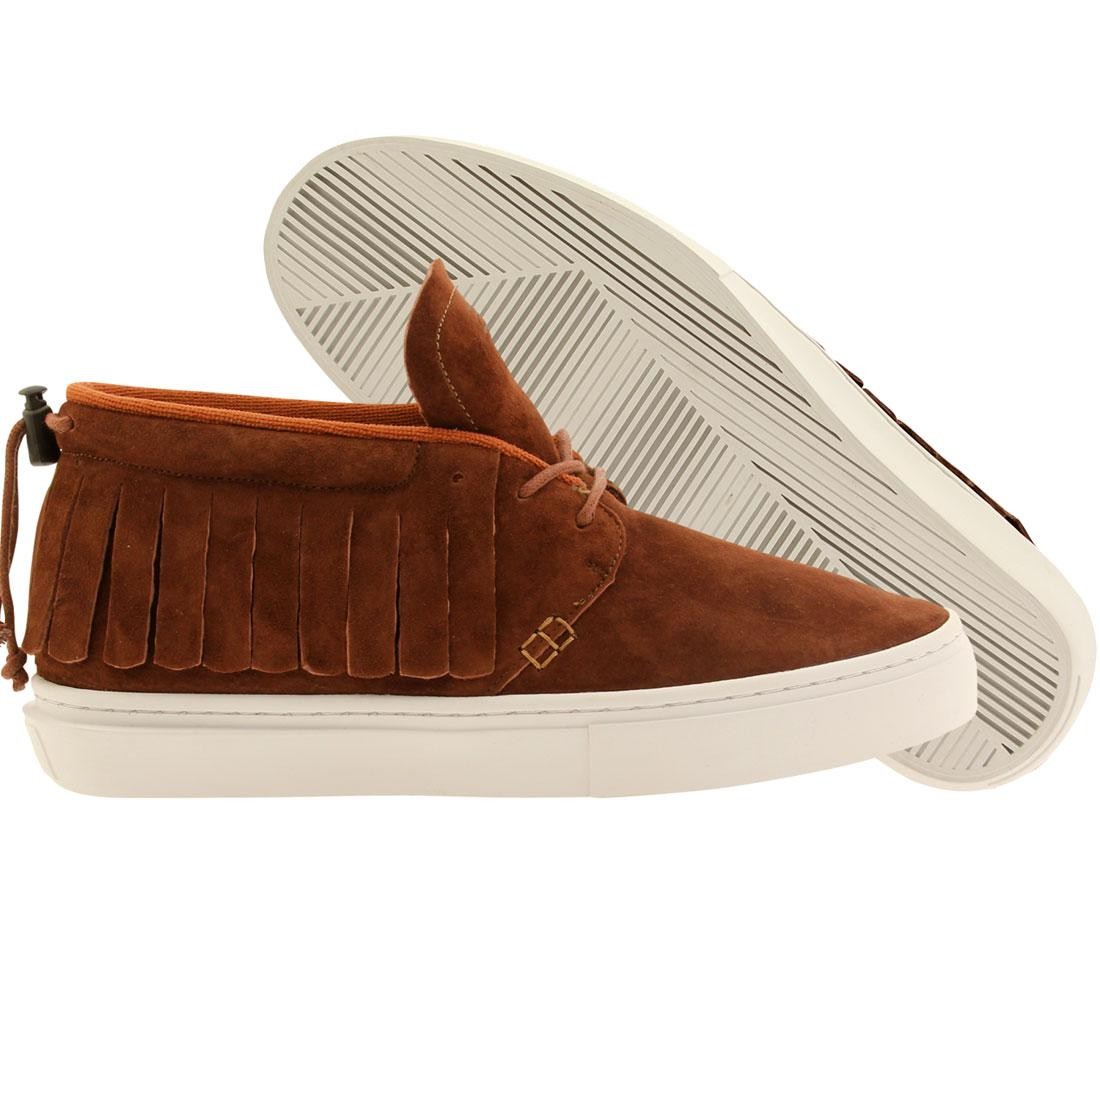 Clear Weather Men The One-O-One (brown / henna suede)